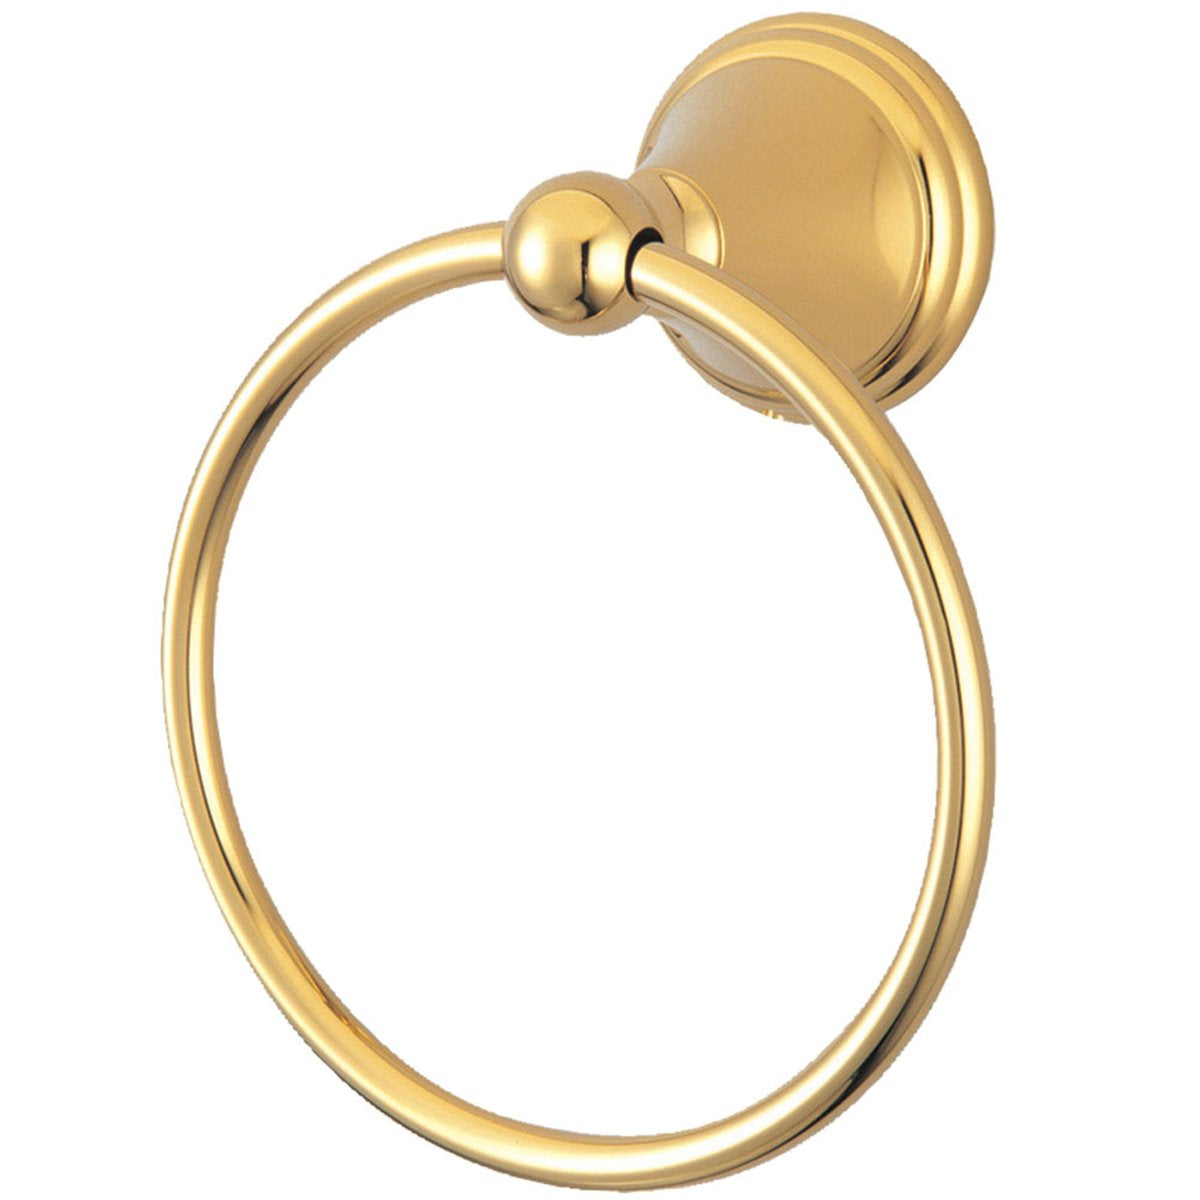 Kingston Brass Governor 6" Towel Ring-Bathroom Accessories-Free Shipping-Directsinks.